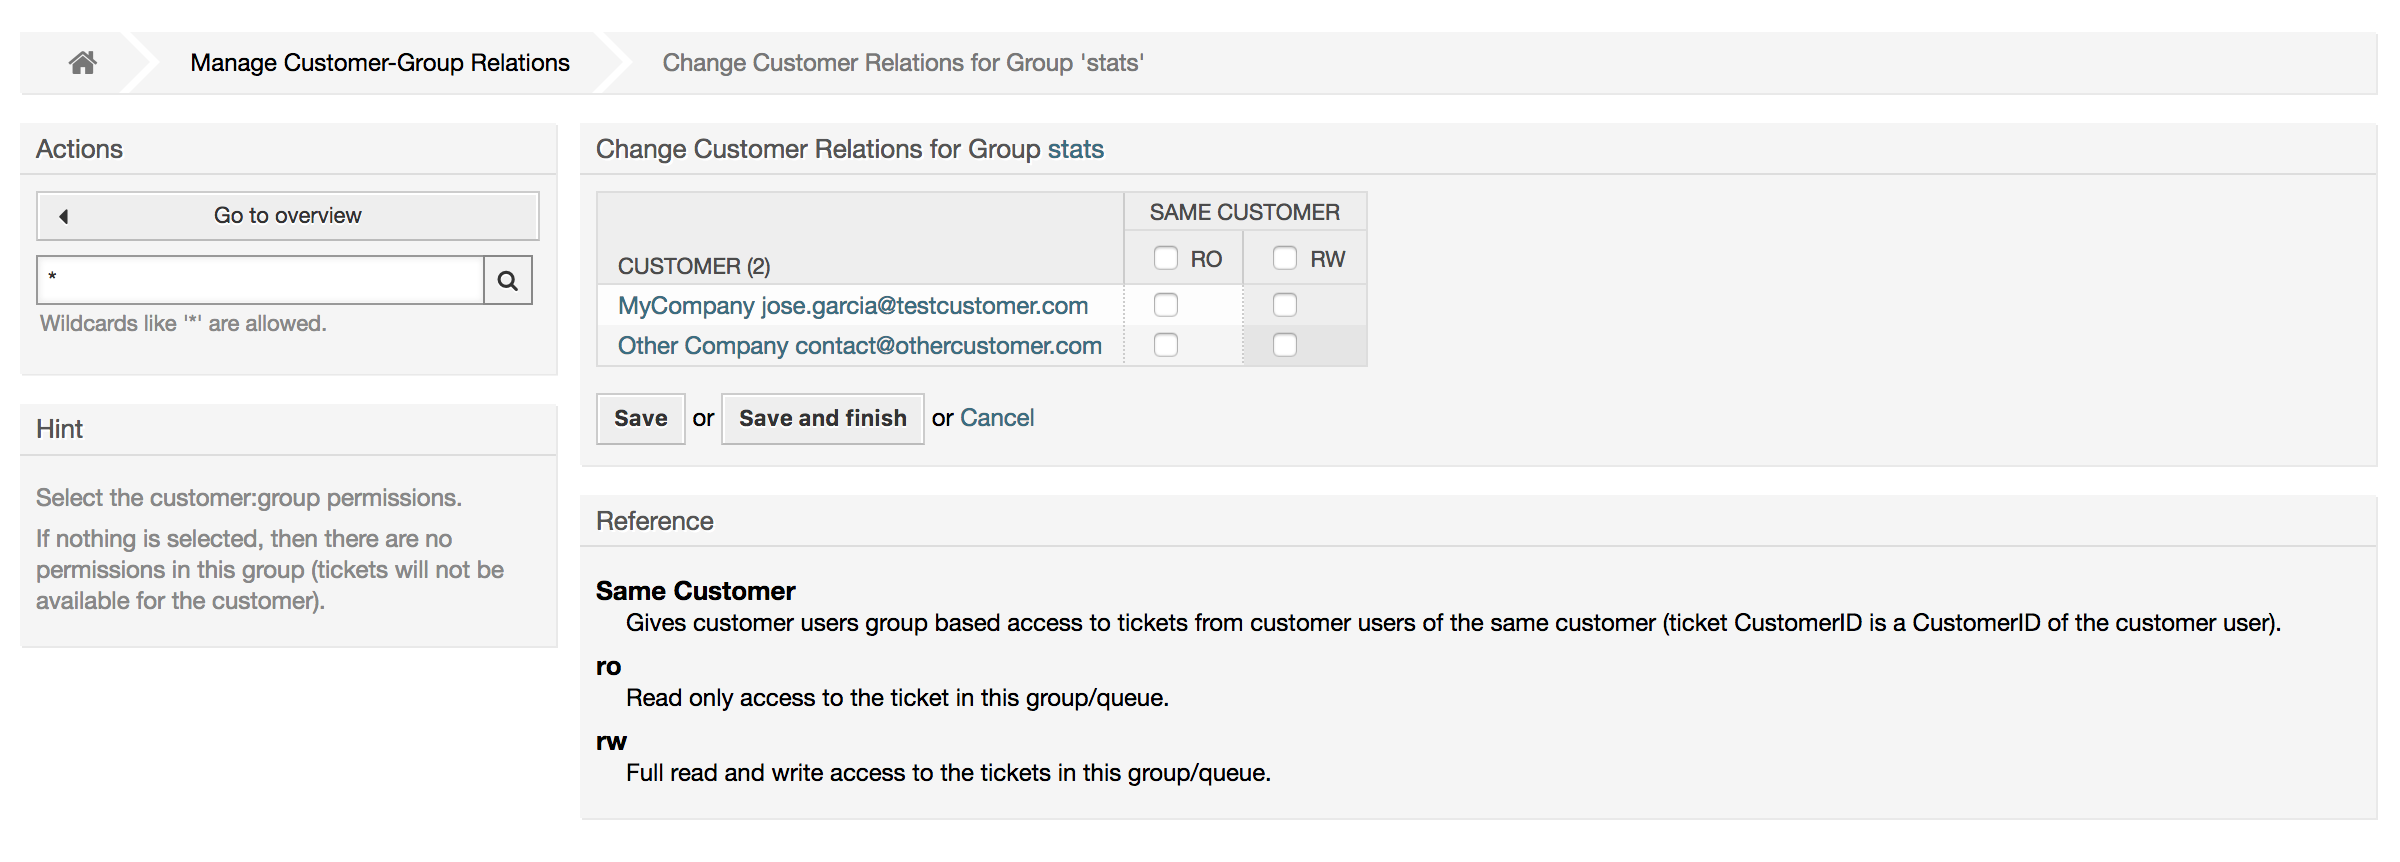 Change Customer user relations for a Group